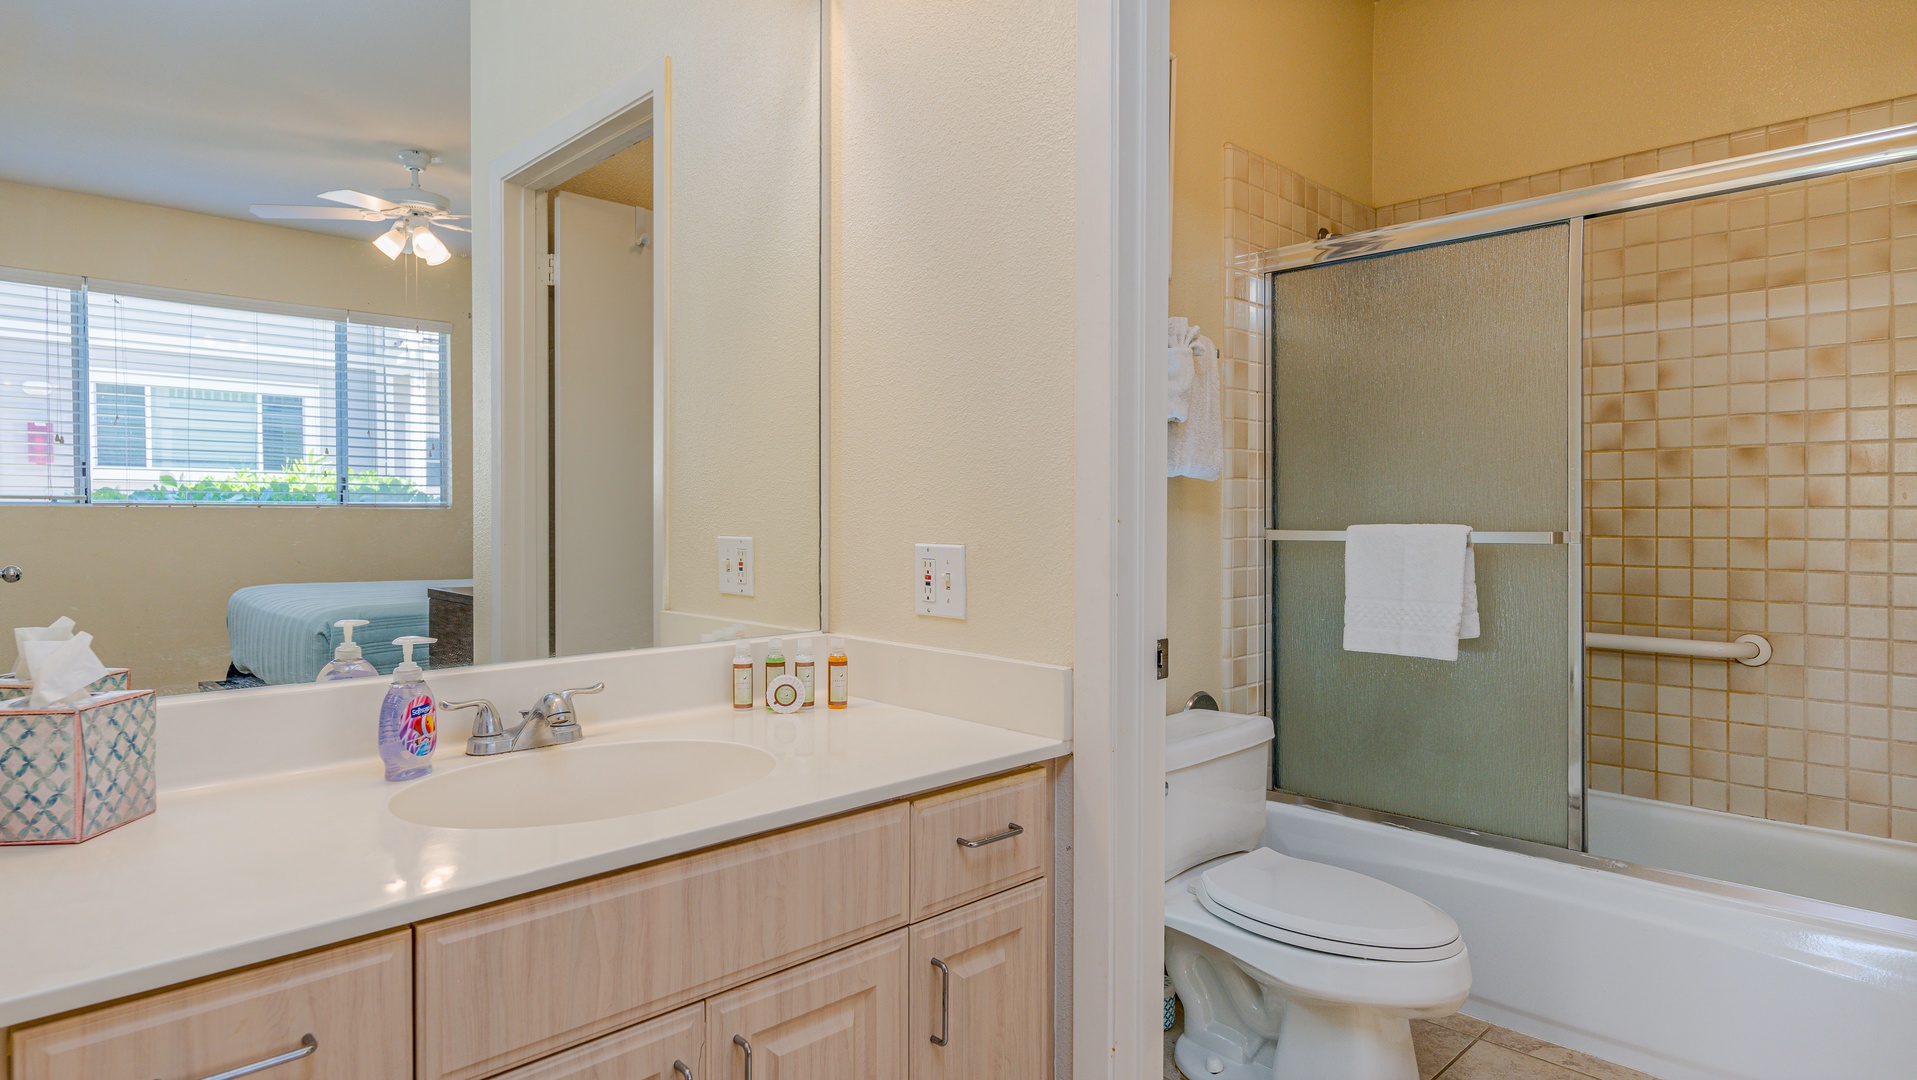 Kapolei Vacation Rentals, Fairways at Ko Olina 18C - The guest bath has tub/shower combo with tilework.